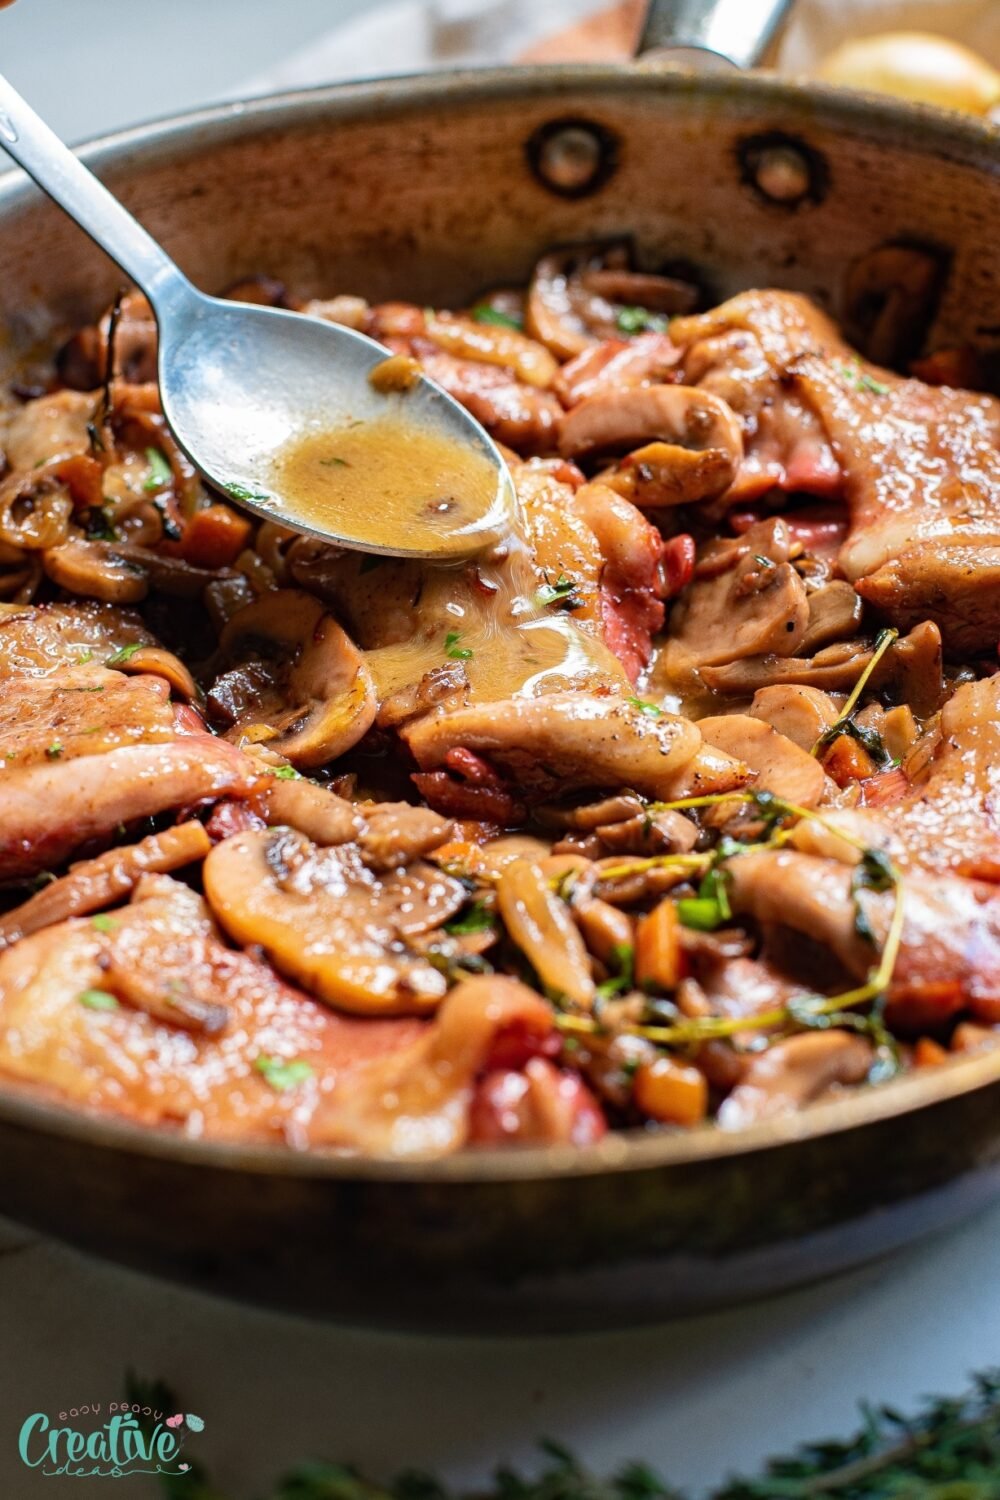 The combination of bone in skillet chicken thighs and mushrooms sizzling in a pan creates a delectable dish that is sure to make your mouth water.